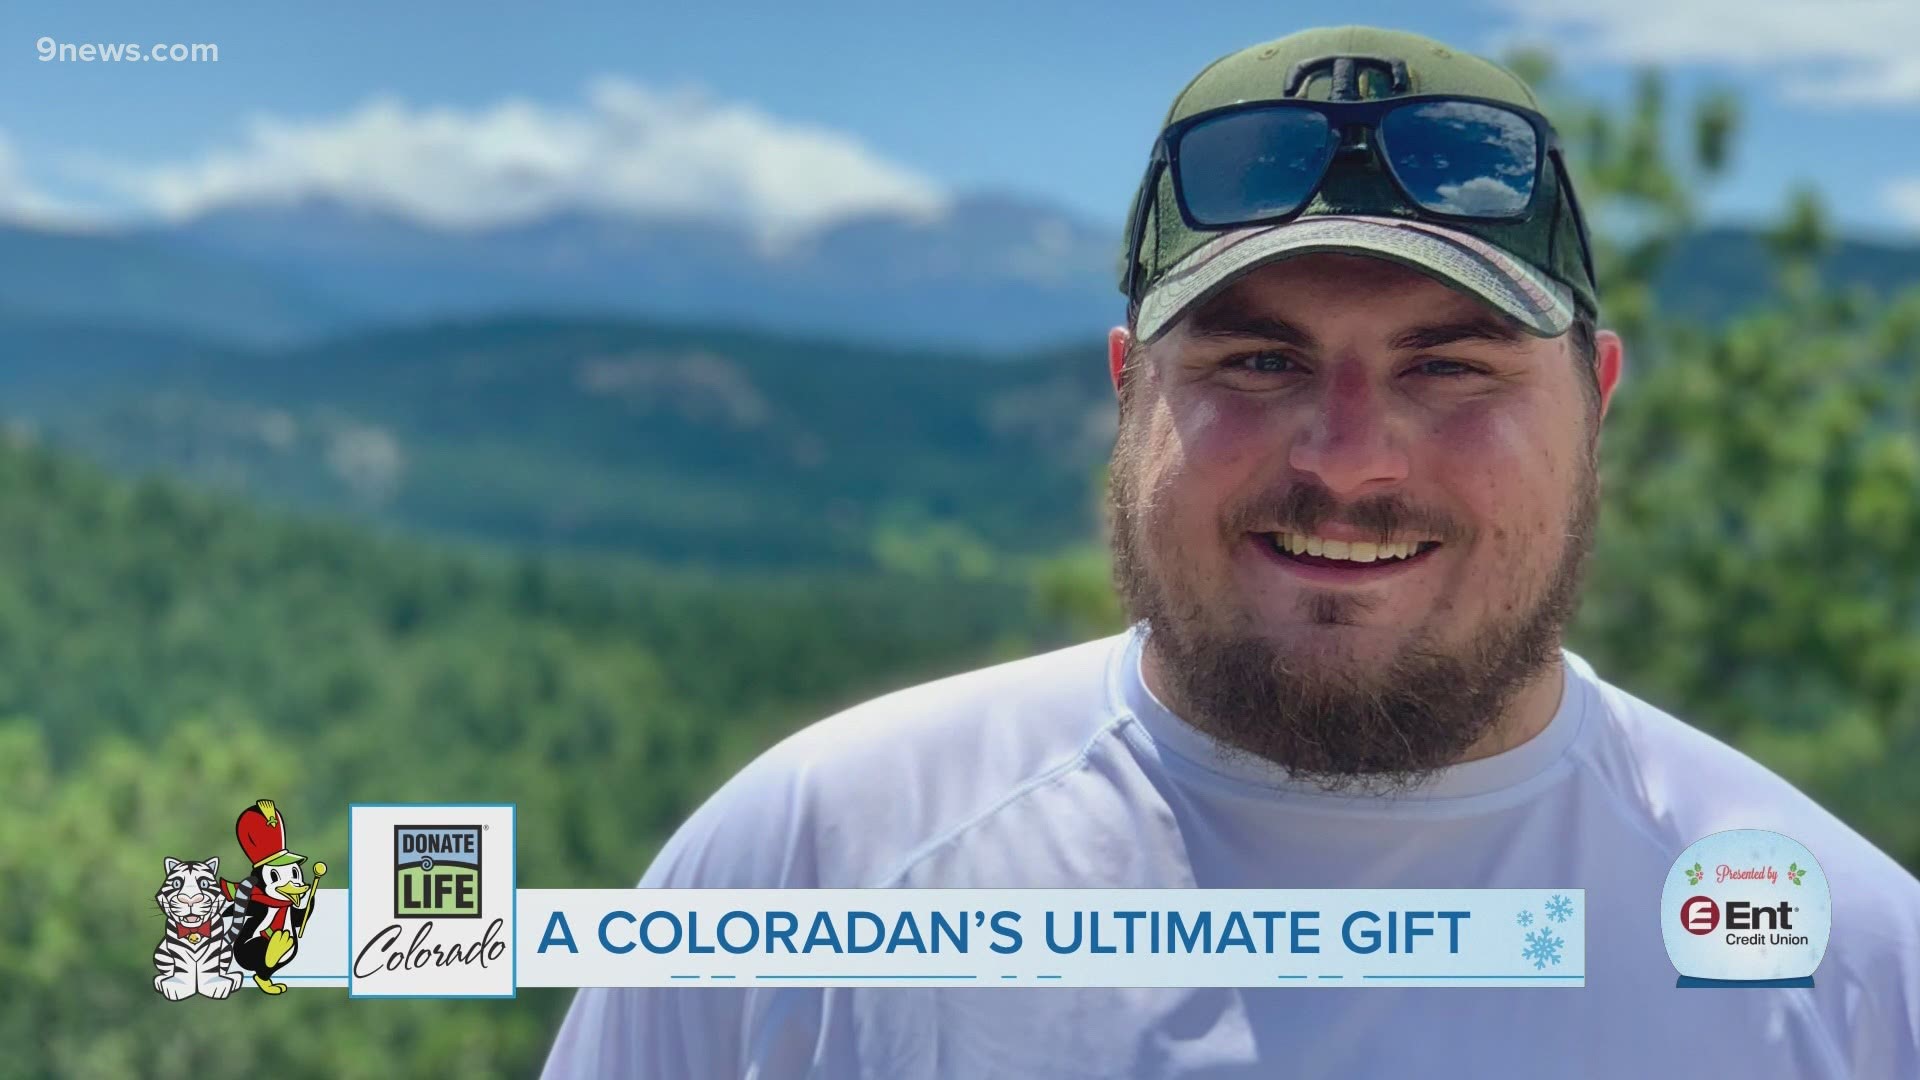 Donor Alliance shares the story of a man who gave the ultimate gift.